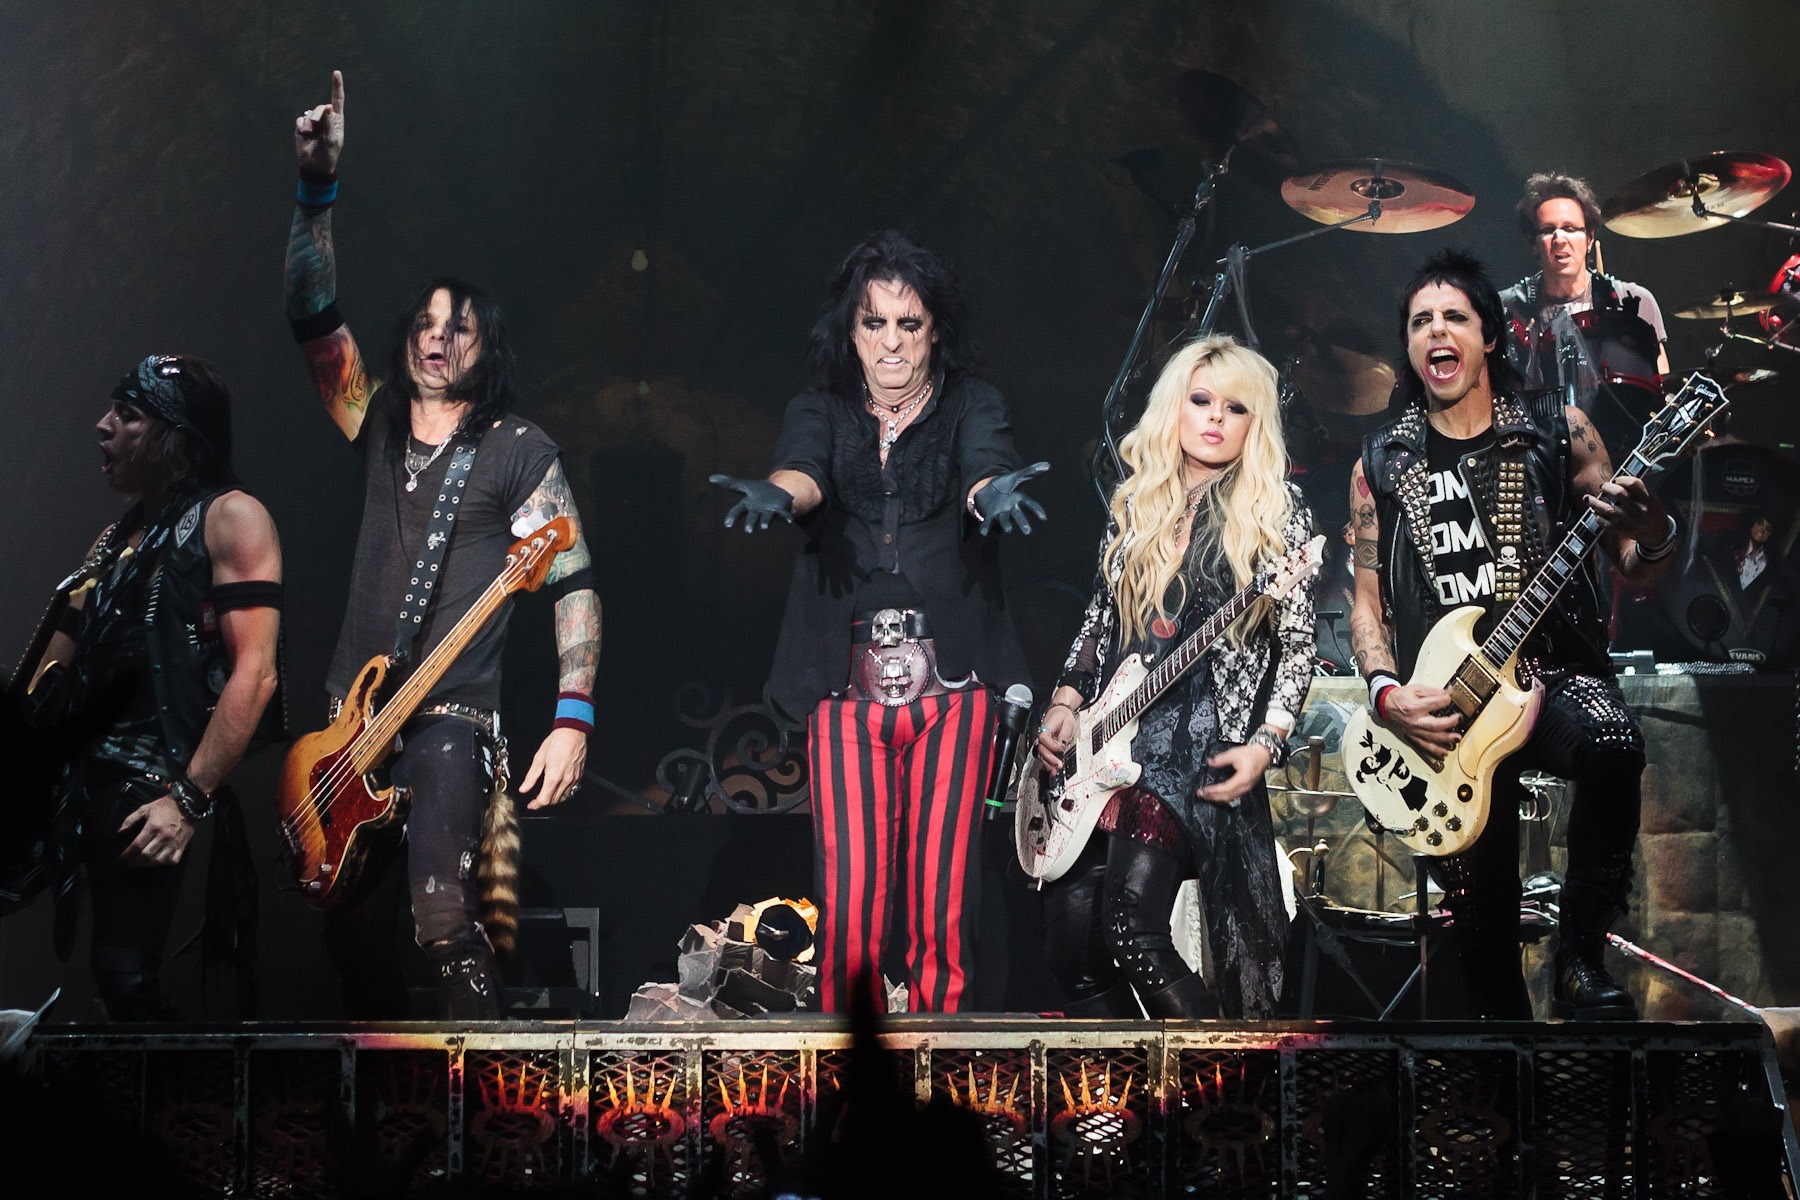 Alice_Cooper_band_Live_in_London_2012-10-28_(close-up)